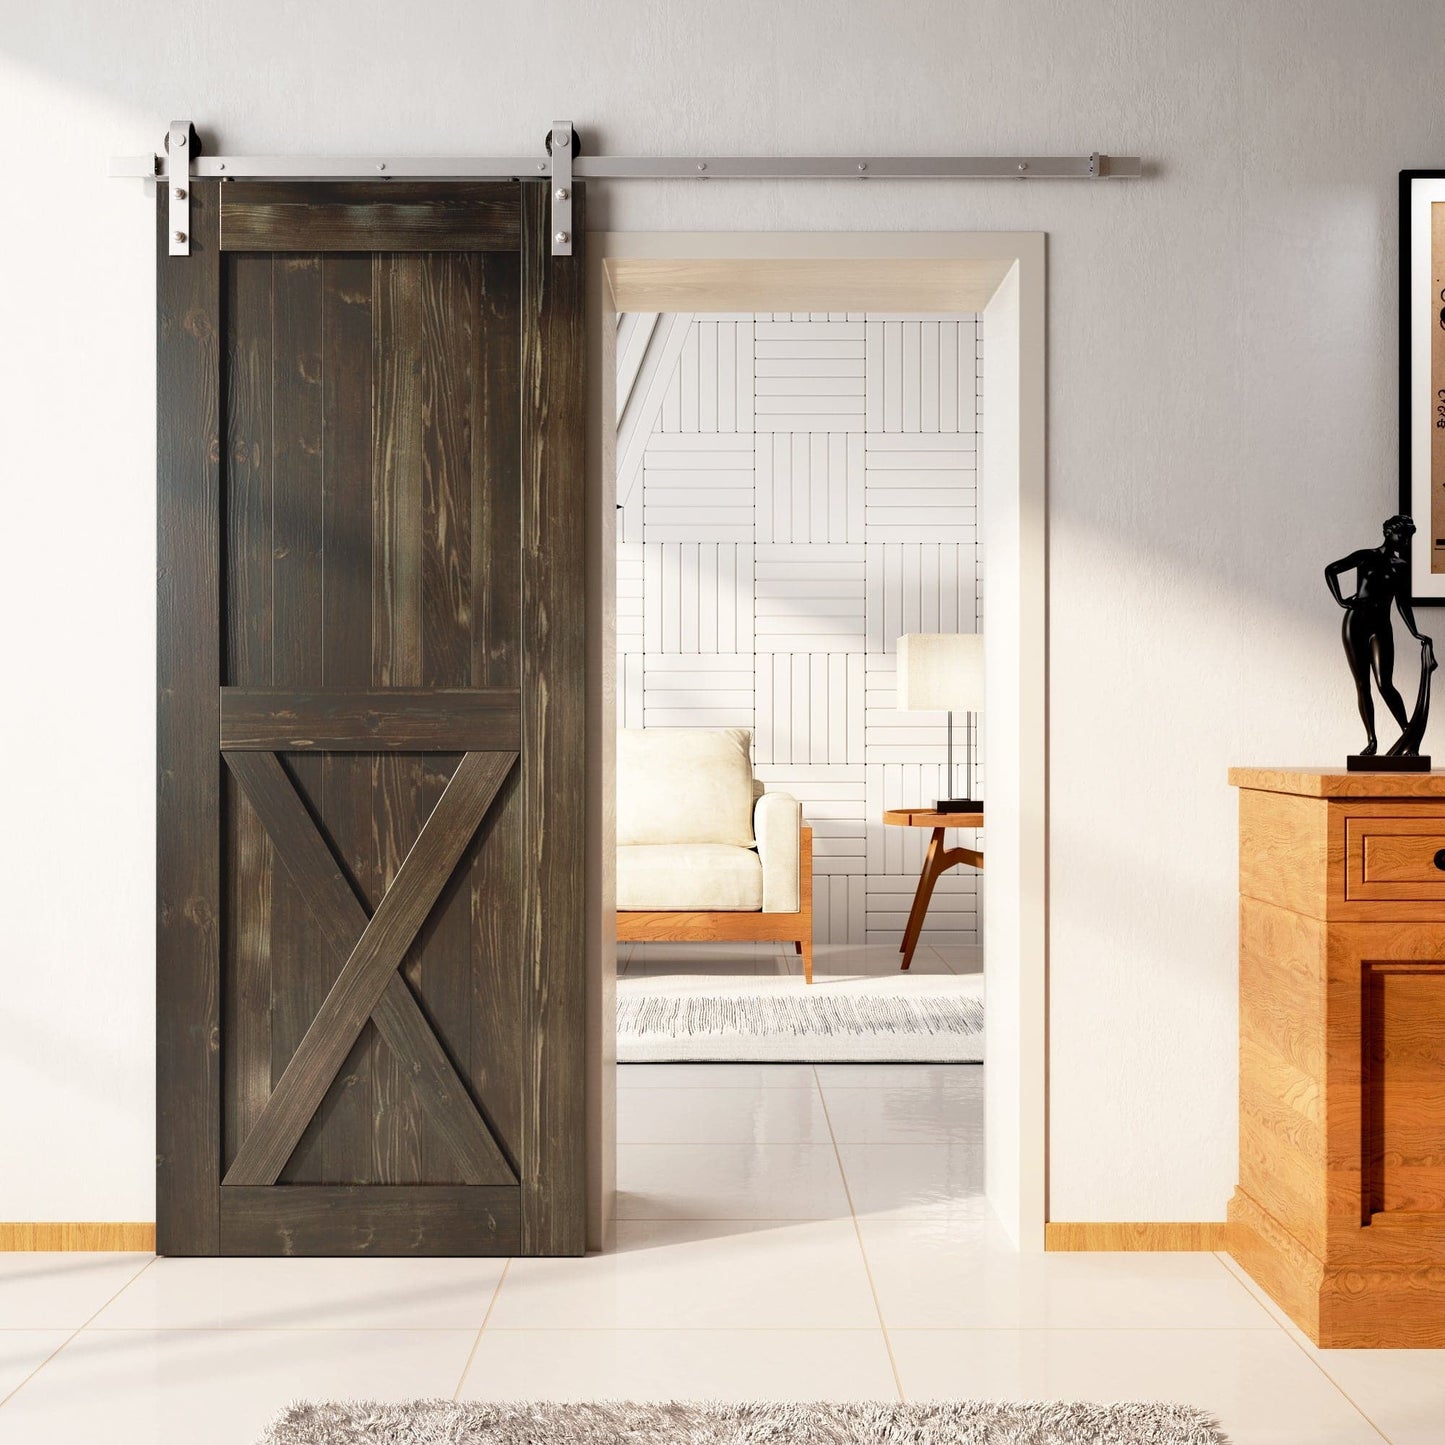 Finished & Unassembled Single Barn Door with Non-Bypass Brushed Nickel Installation Hardware Kit (Single X Design)